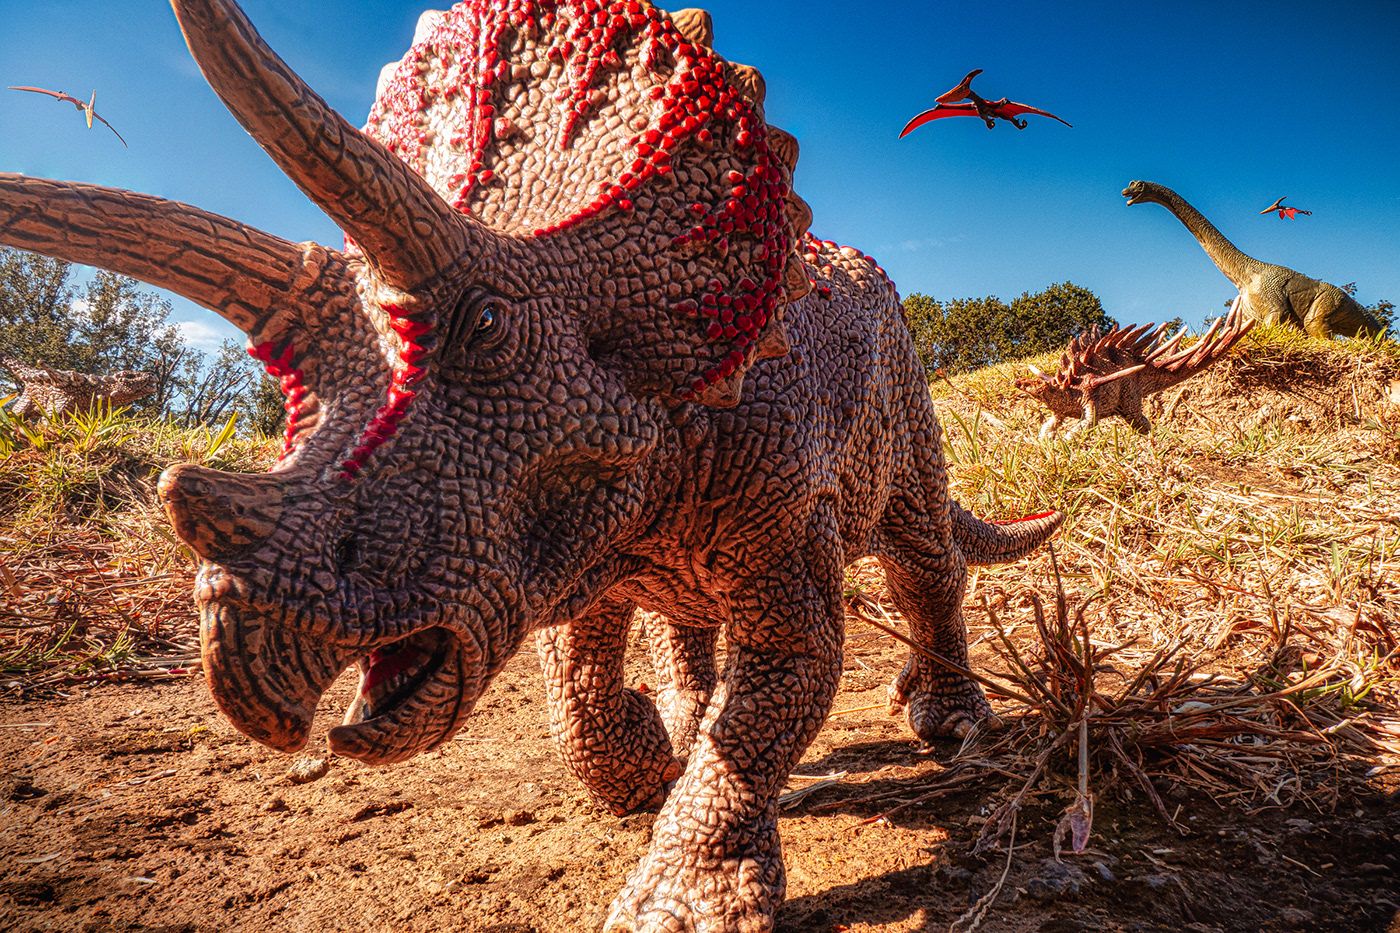 The dinosaurs of Schleich were photographed.
Triceratops. Pteranodon.